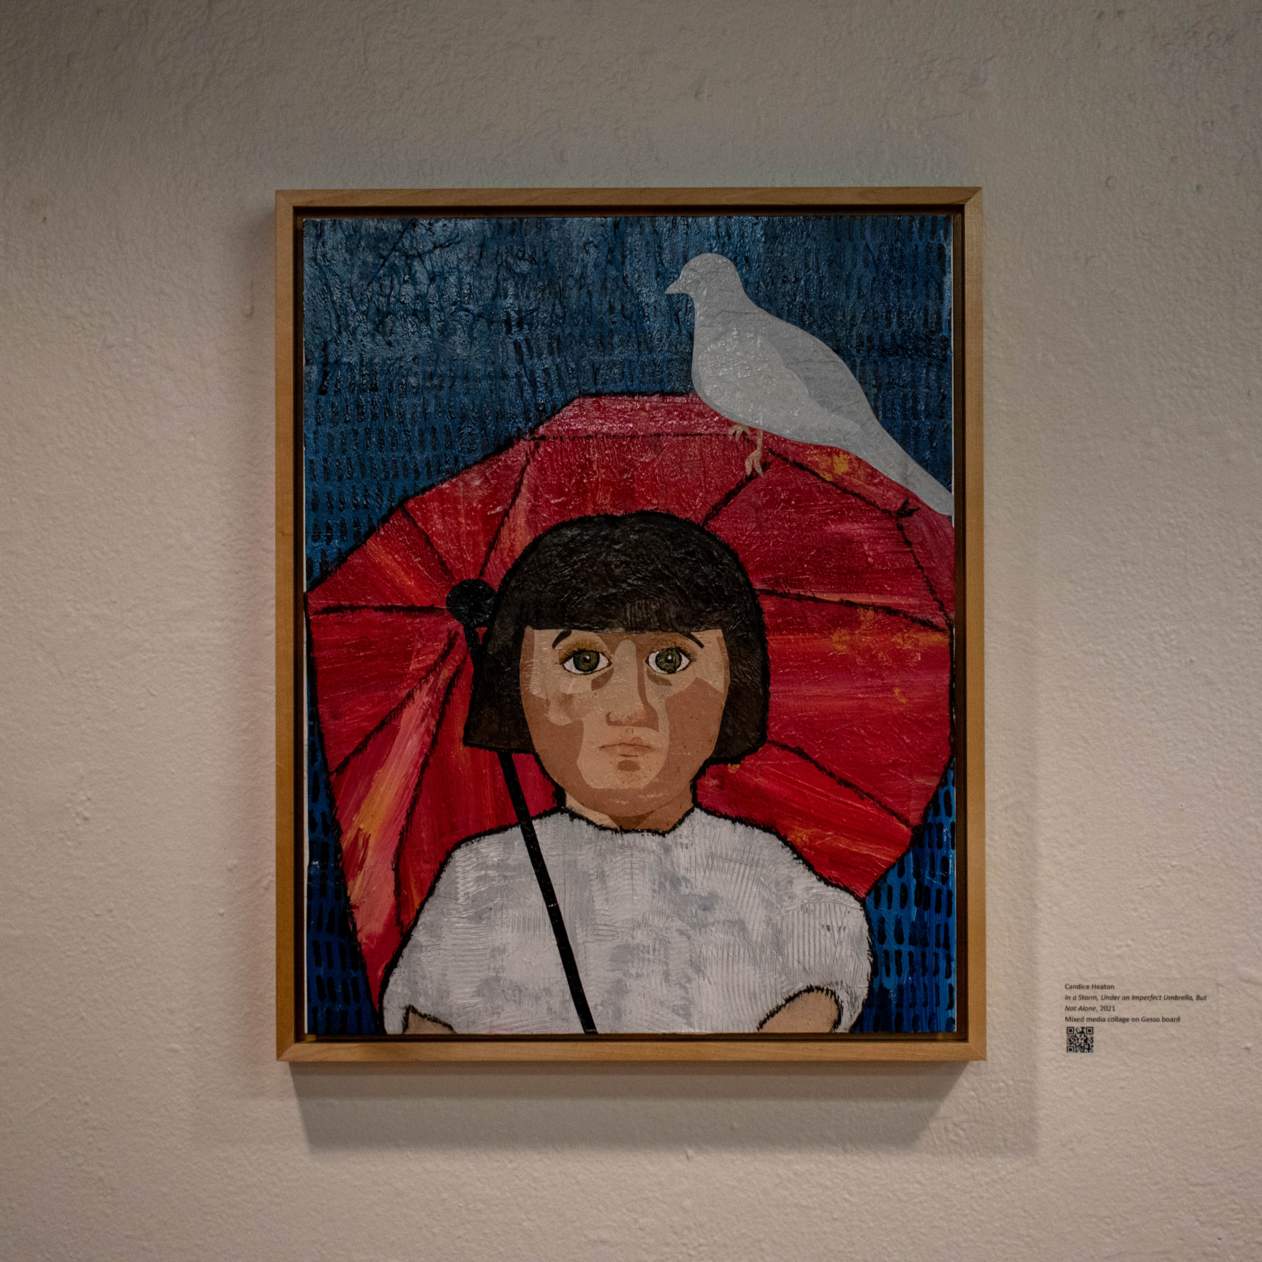 Gesso and mixed media textured painting of a person in white under a red umbrella with a white bird perching on it all on a blue background. Hung on a white wall.